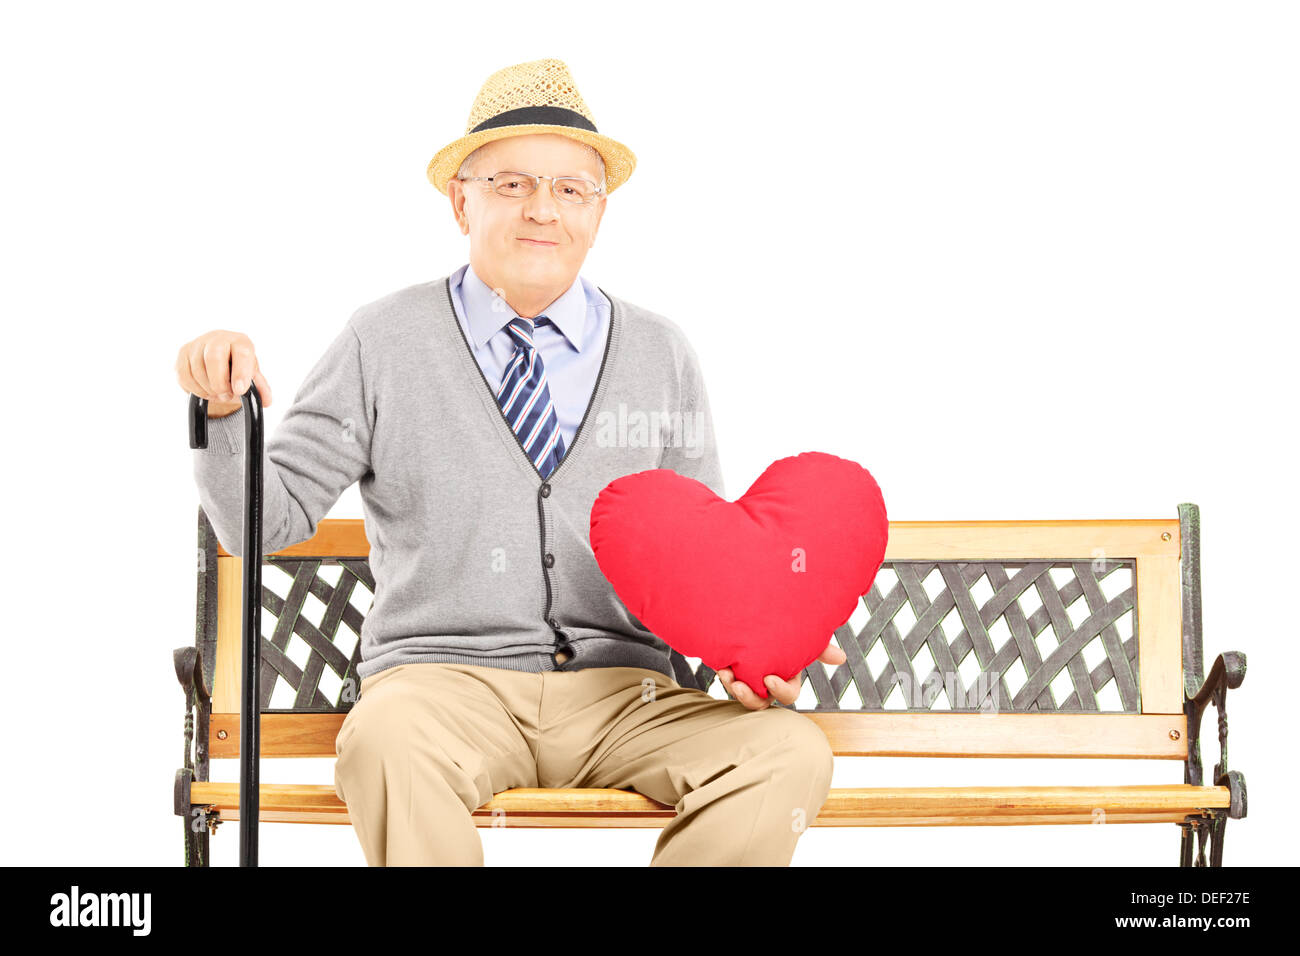 Senior man sitting on a wooden bench and holding a red heart Stock Photo